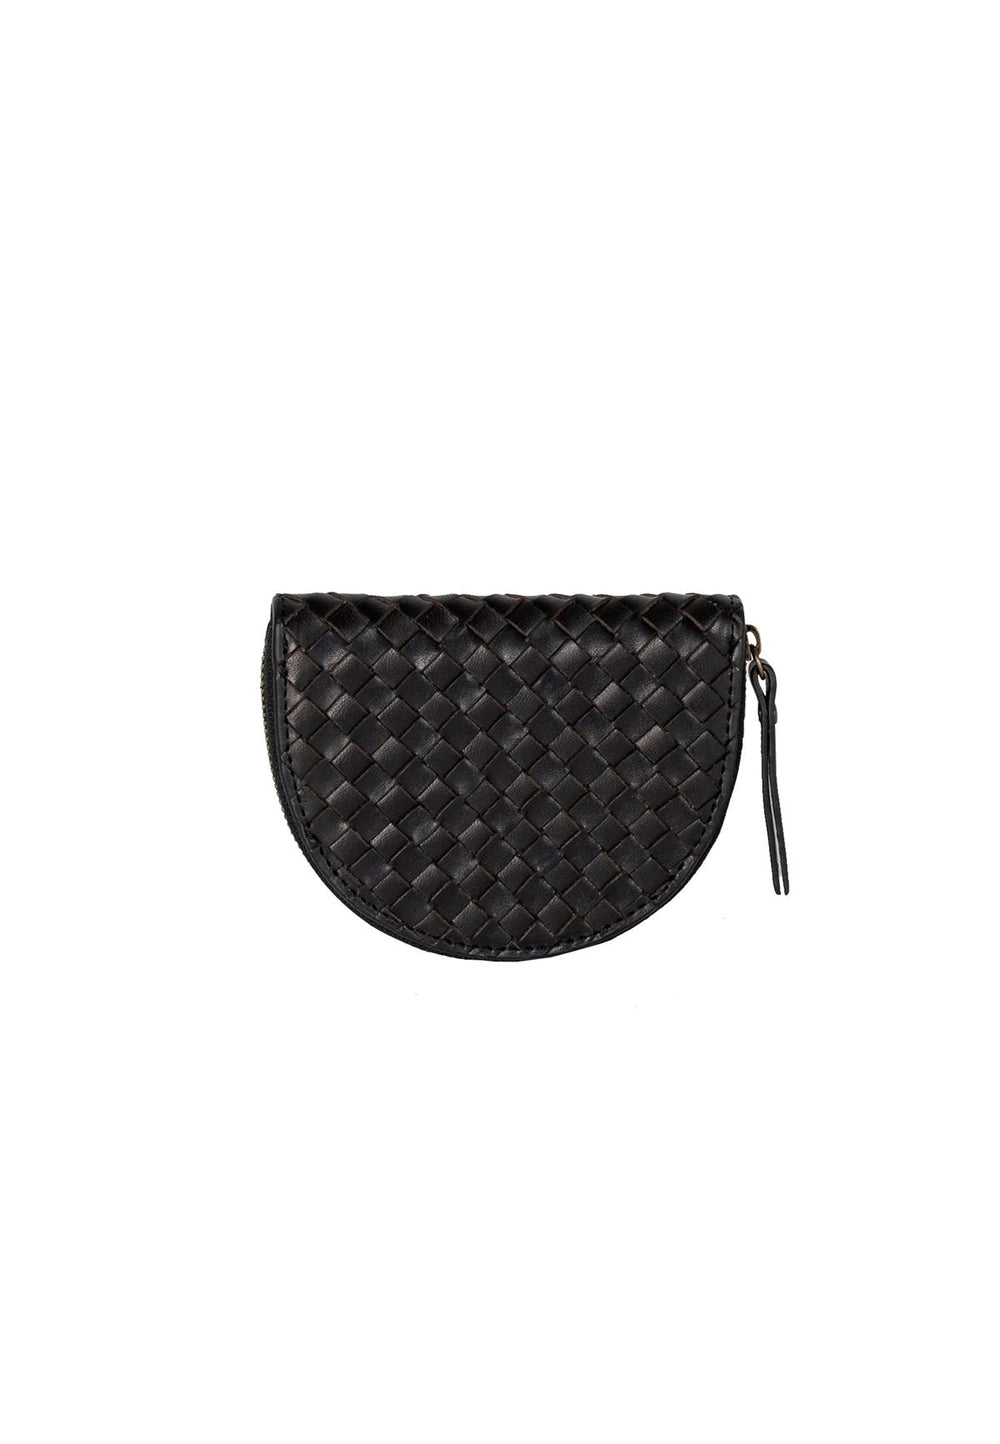 LAURA'S COIN PURSE BLACK WOVEN LEATHER - Moeon